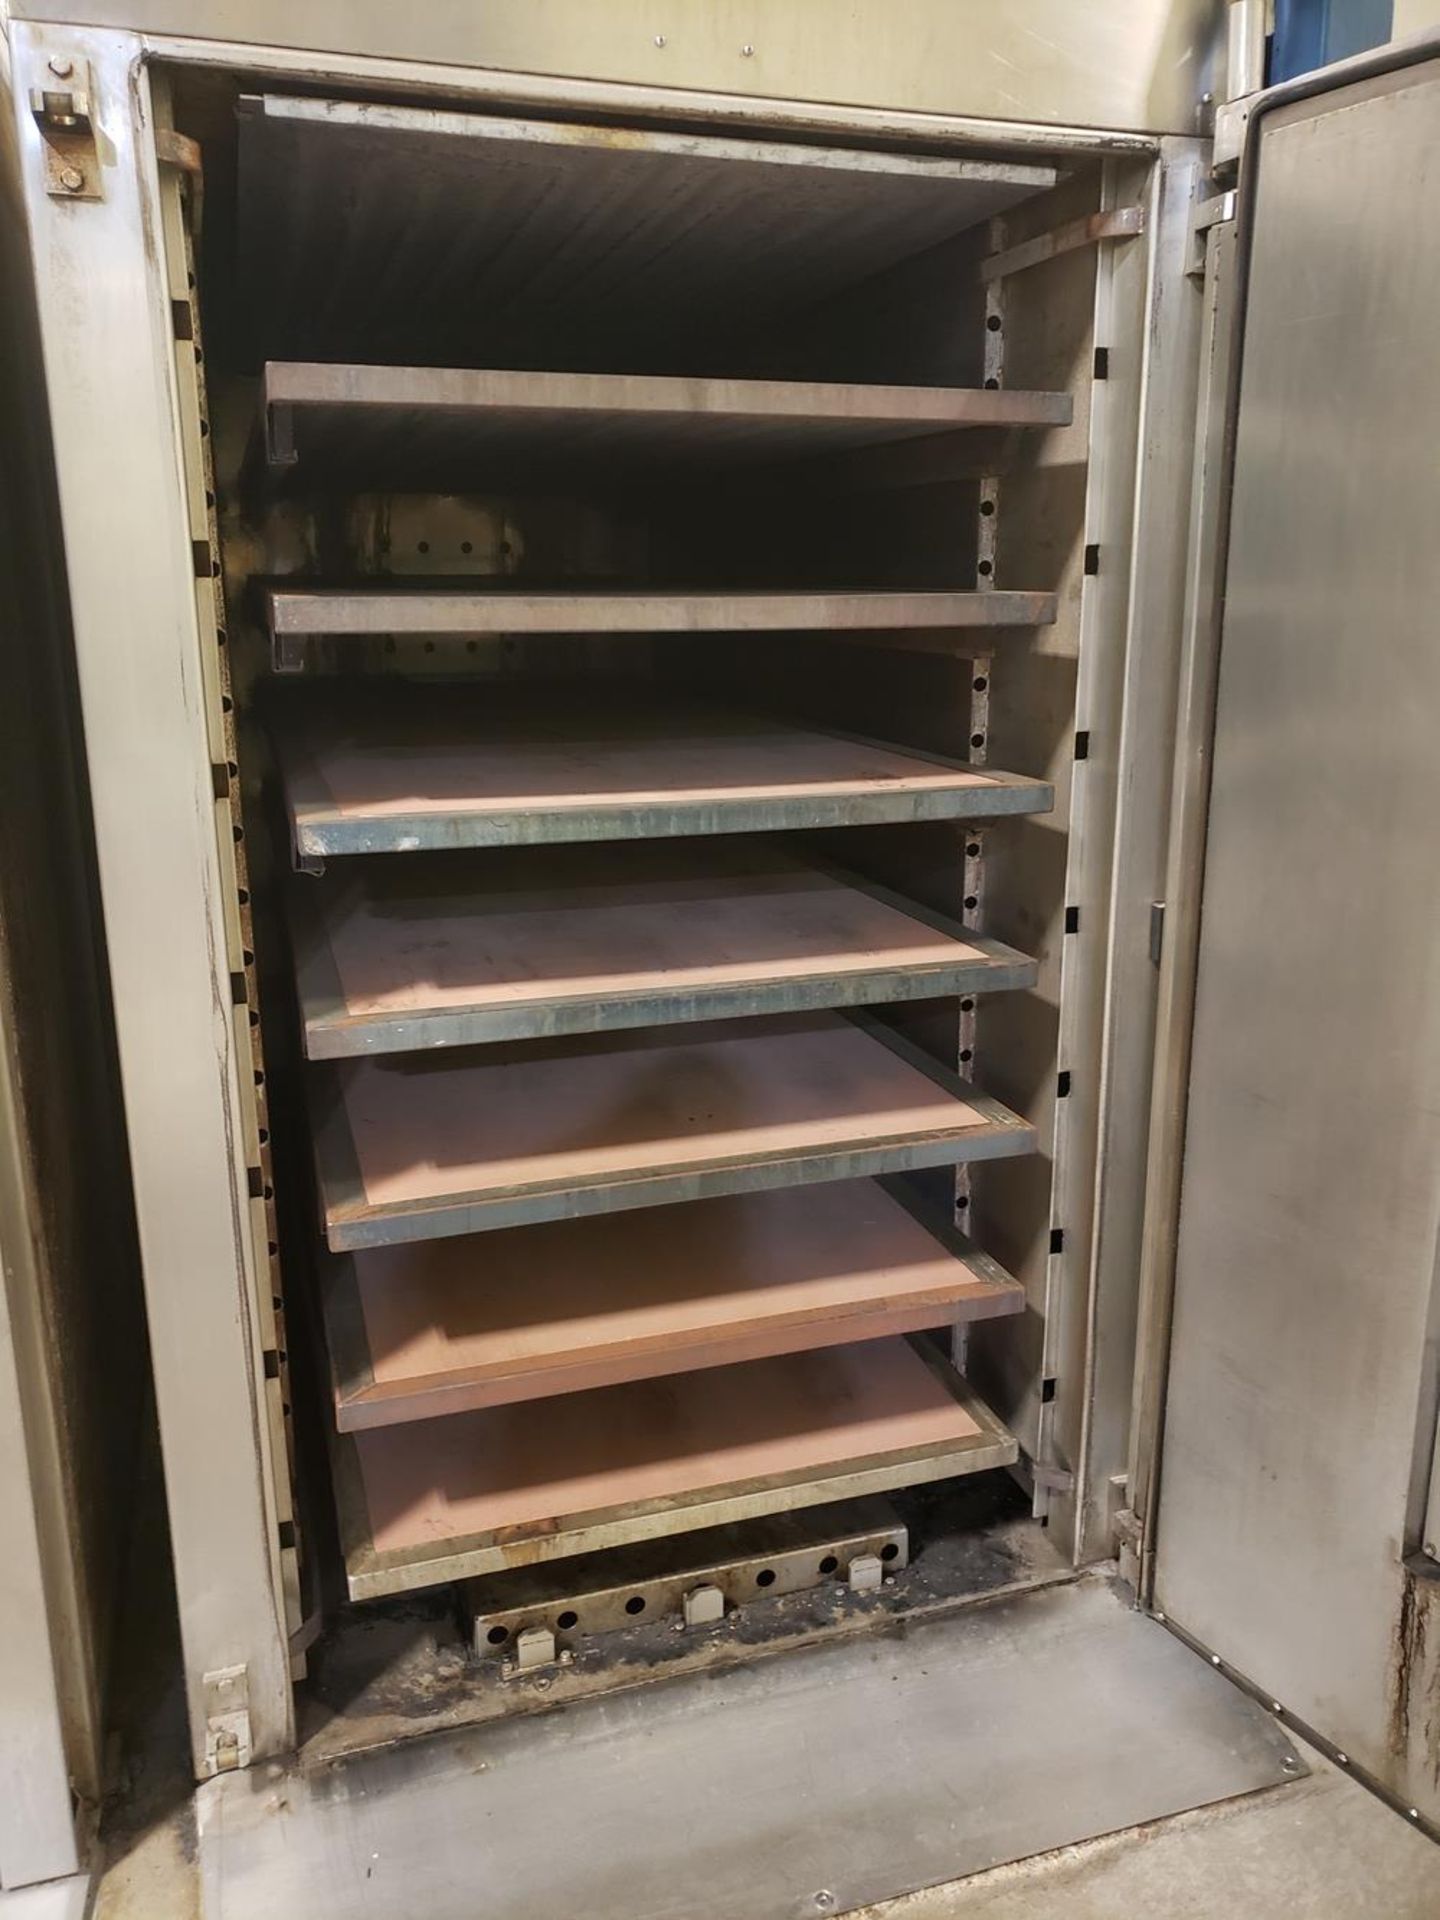 2009 Daub Multi Deck Oven, M# RGTO 10.20.75.07SX08, S/N 100825-571, W/ (7) 39" X 8 | Rig Fee: $2000 - Image 4 of 5